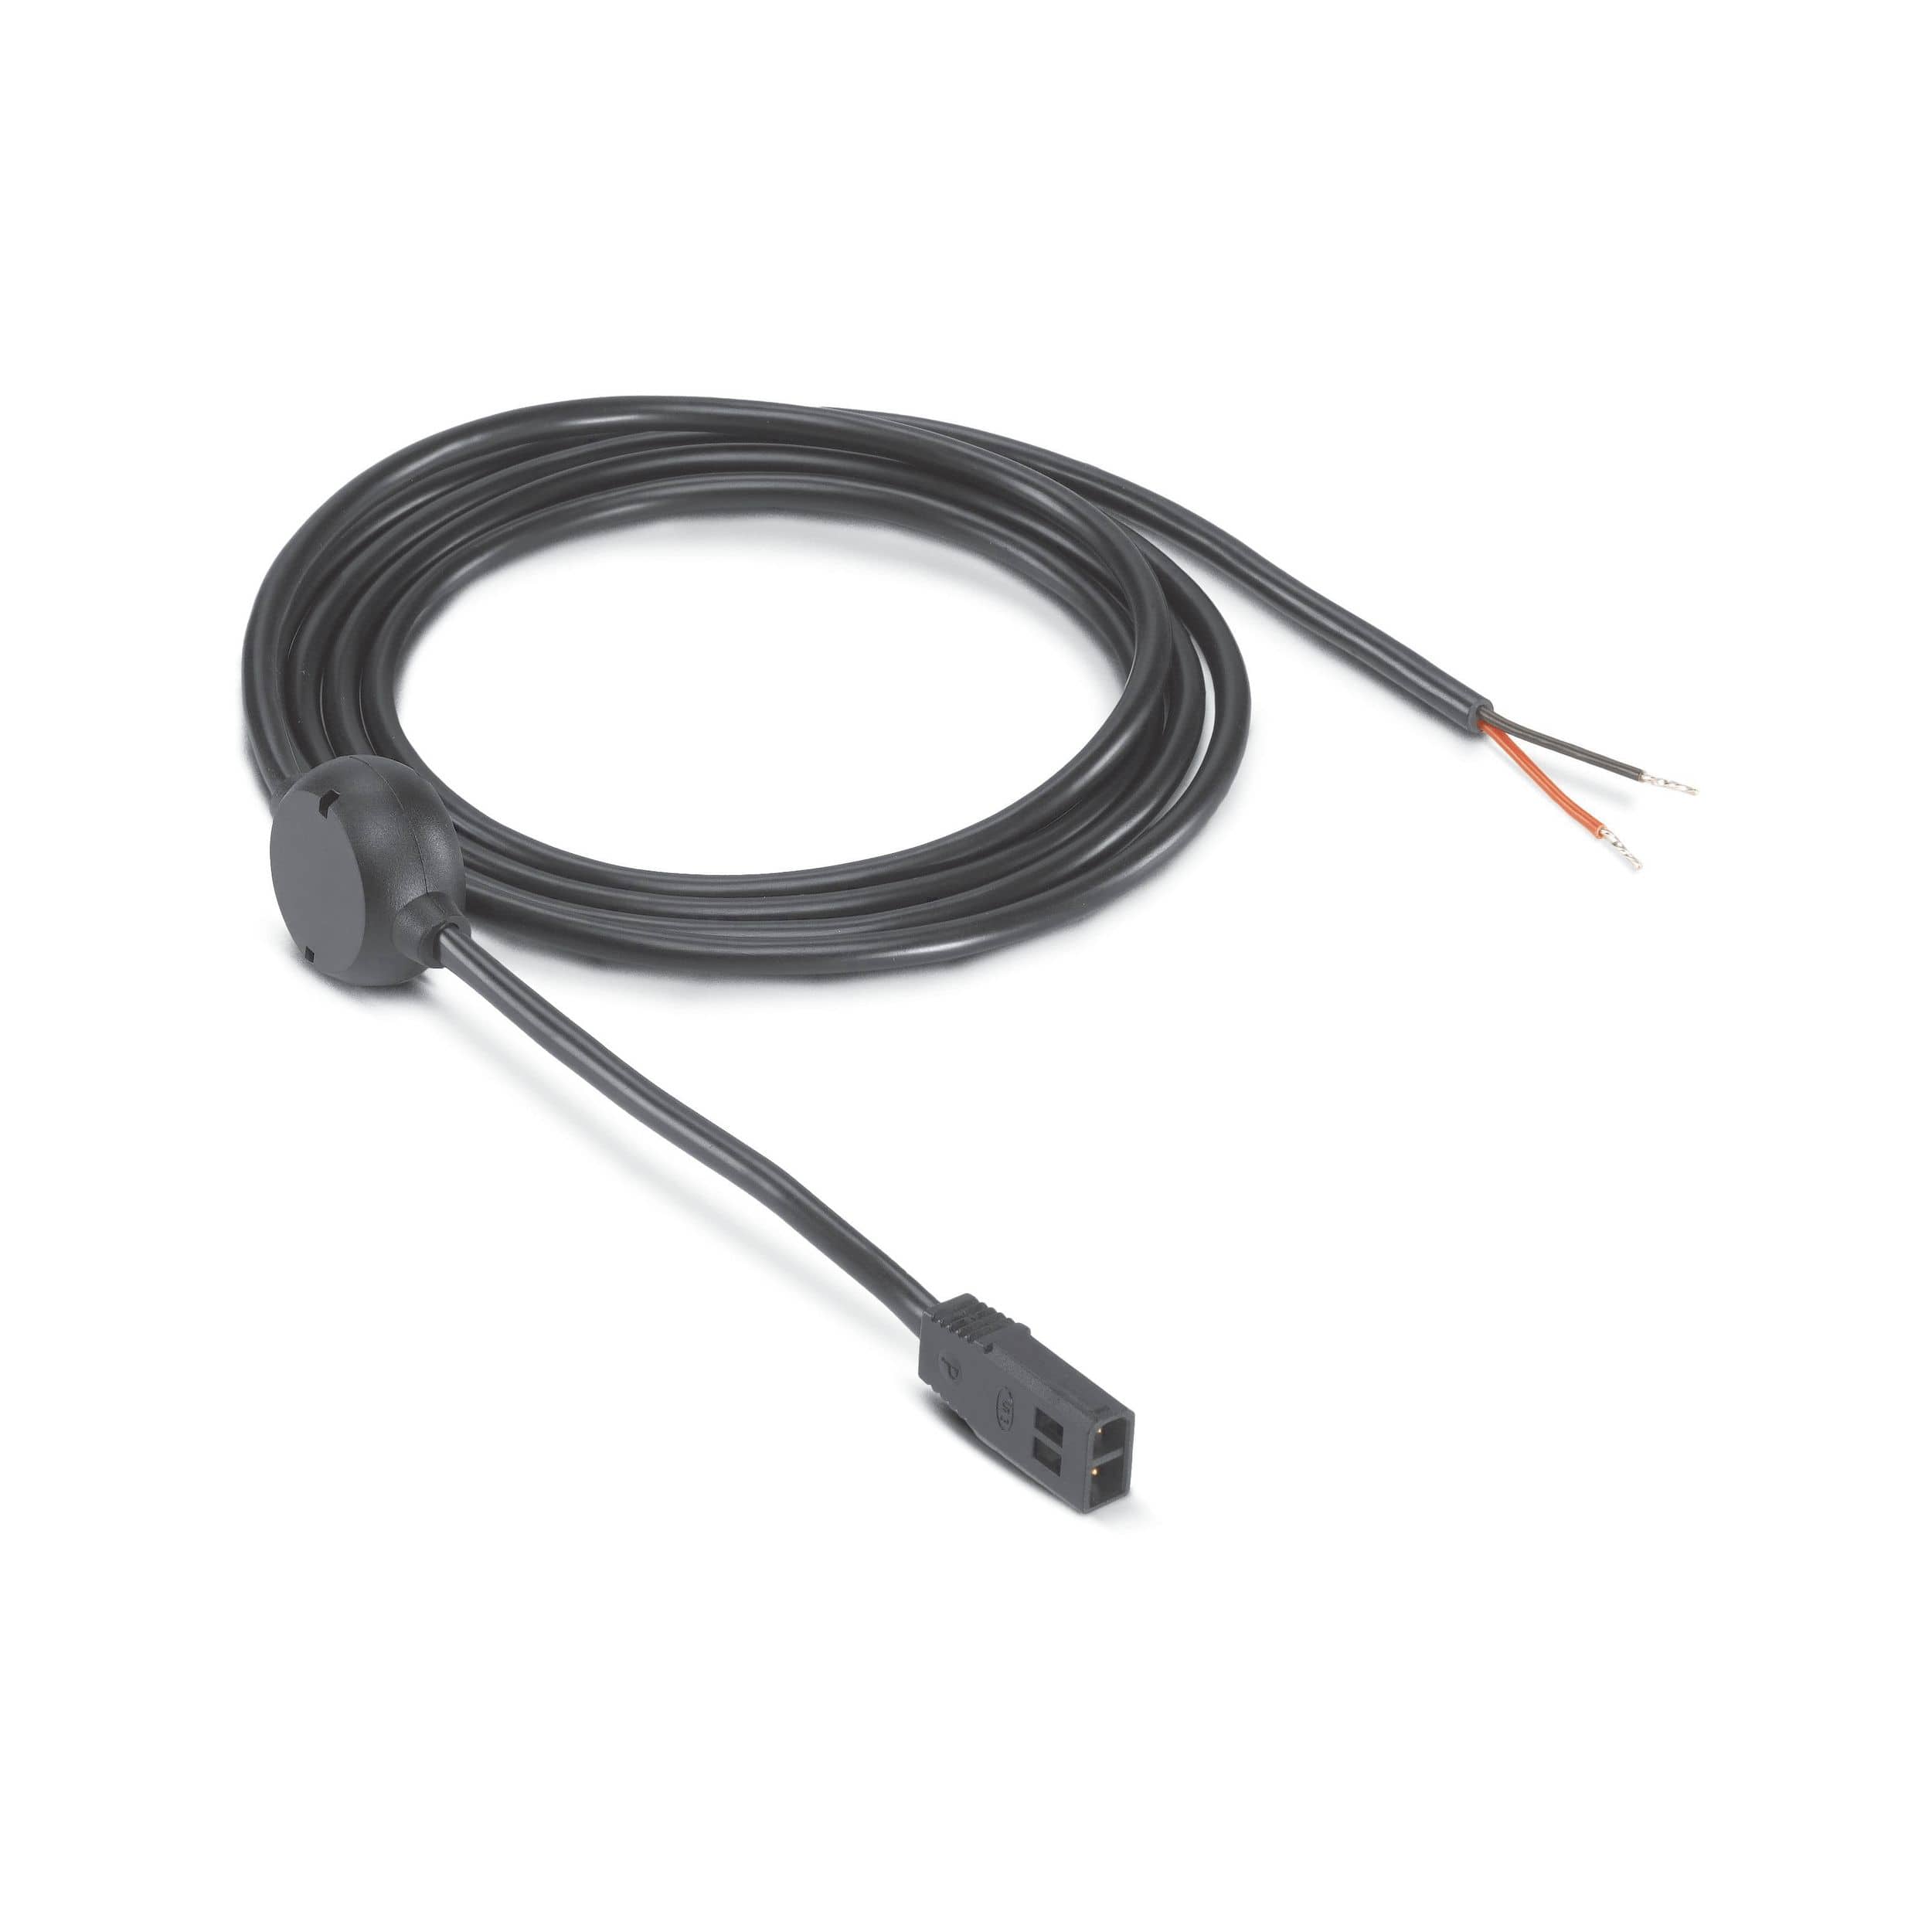 https://media-www.canadiantire.ca/product/playing/fishing/fishing-equipment/1785189/humminbird-pc-11-power-cable-332eaeed-f6b4-4163-9f42-365a84283968-jpgrendition.jpg